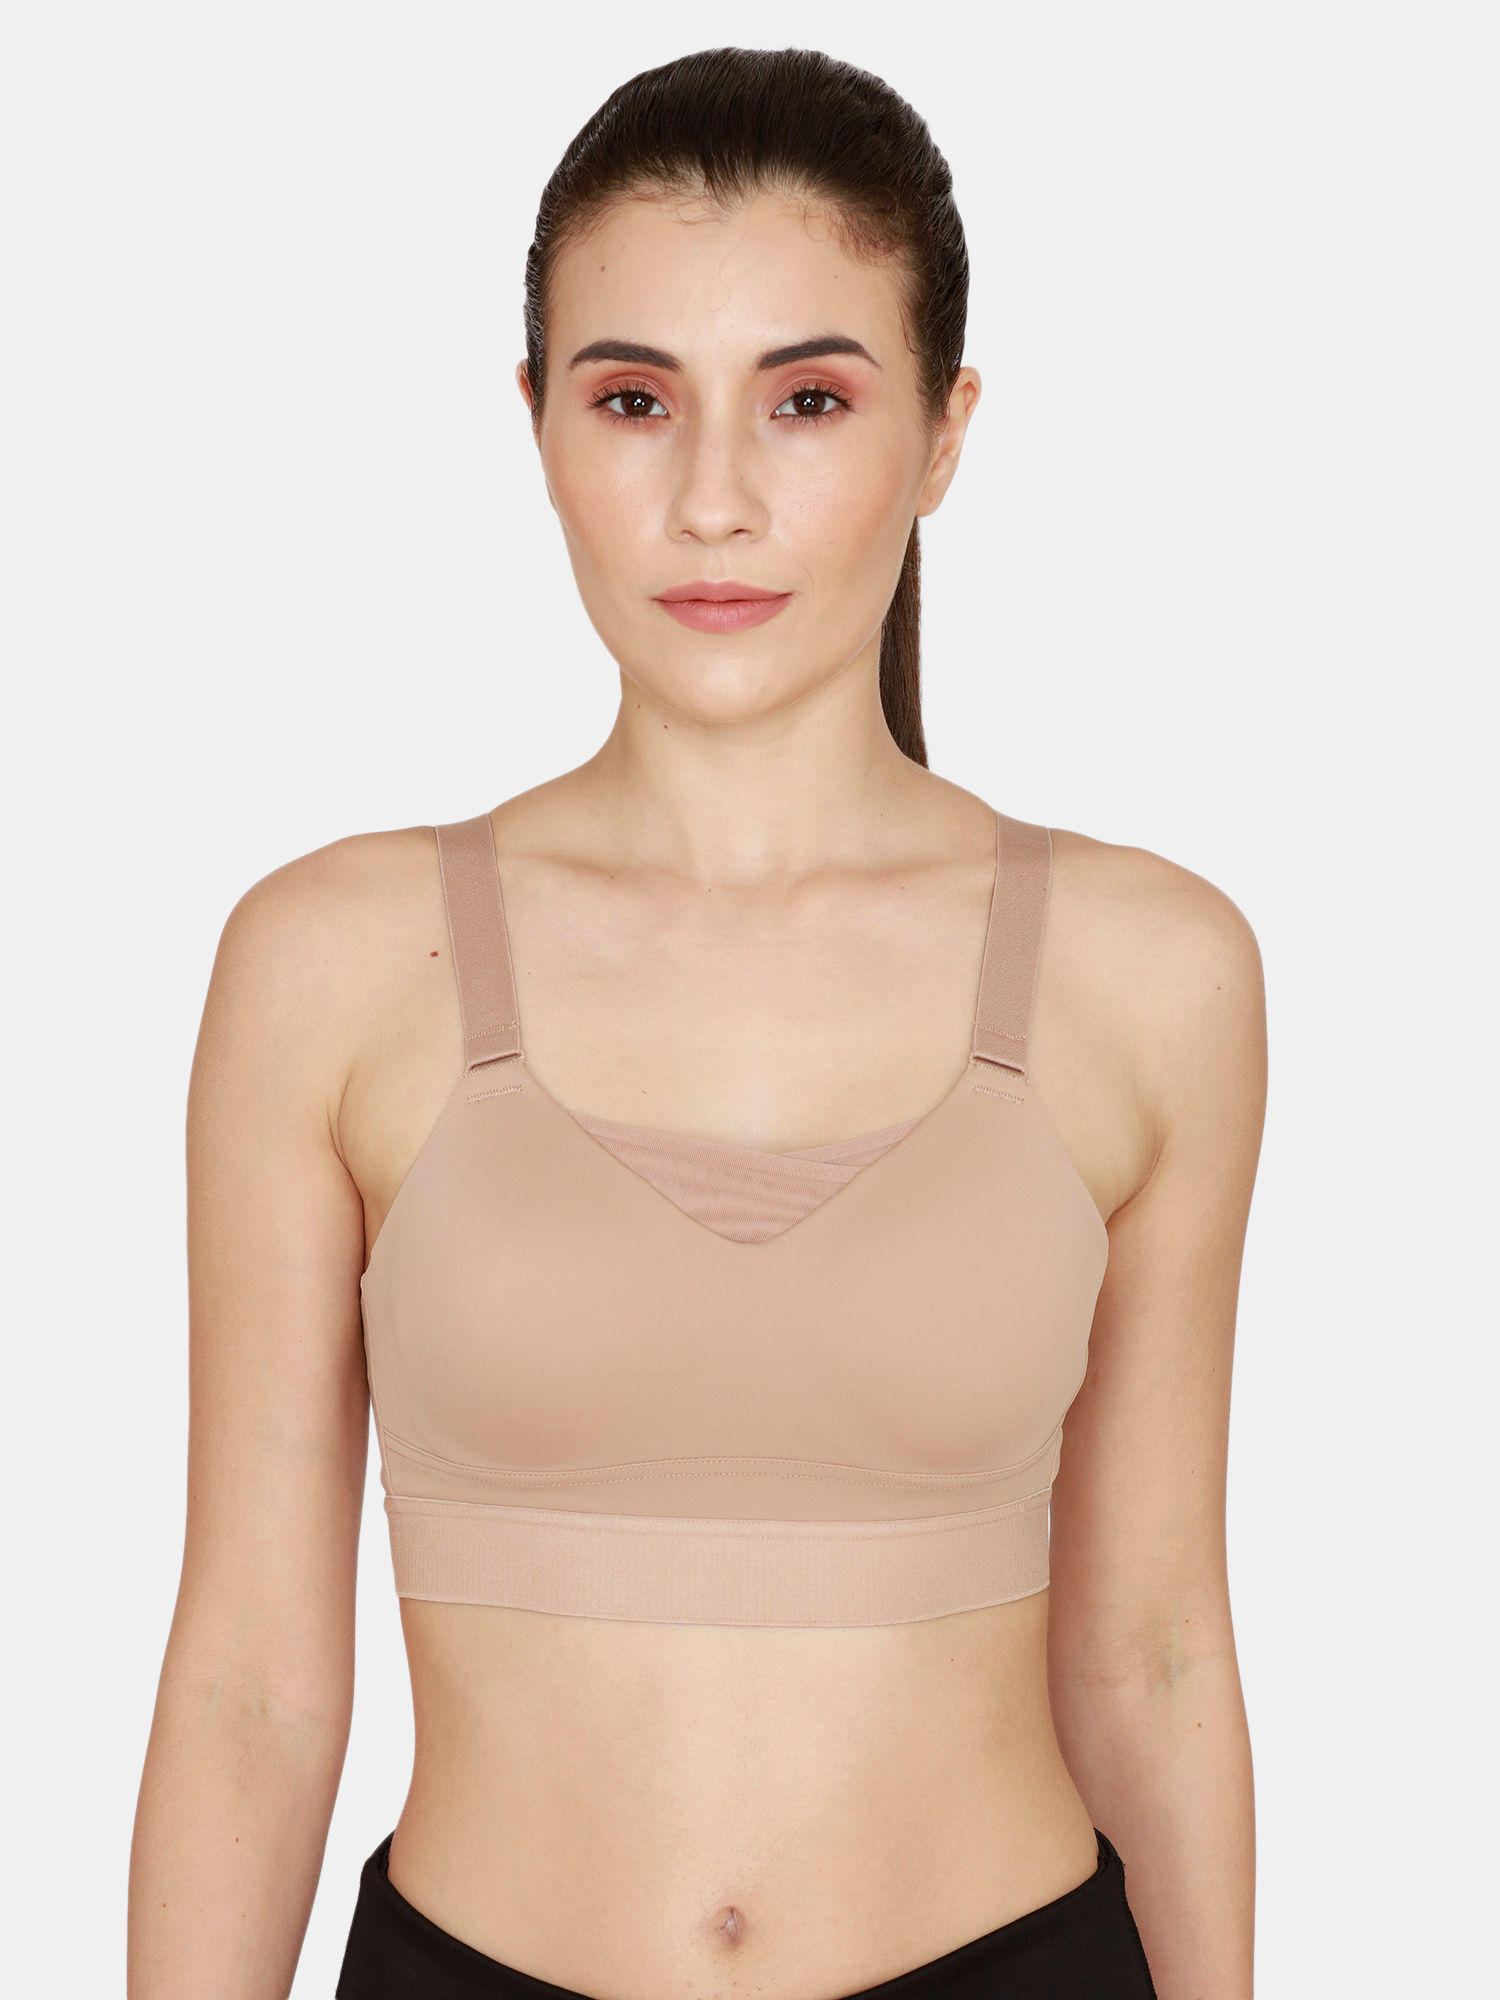 Buy Zelocity High Impact Sports Bra - Amethyst at Rs.1033 online